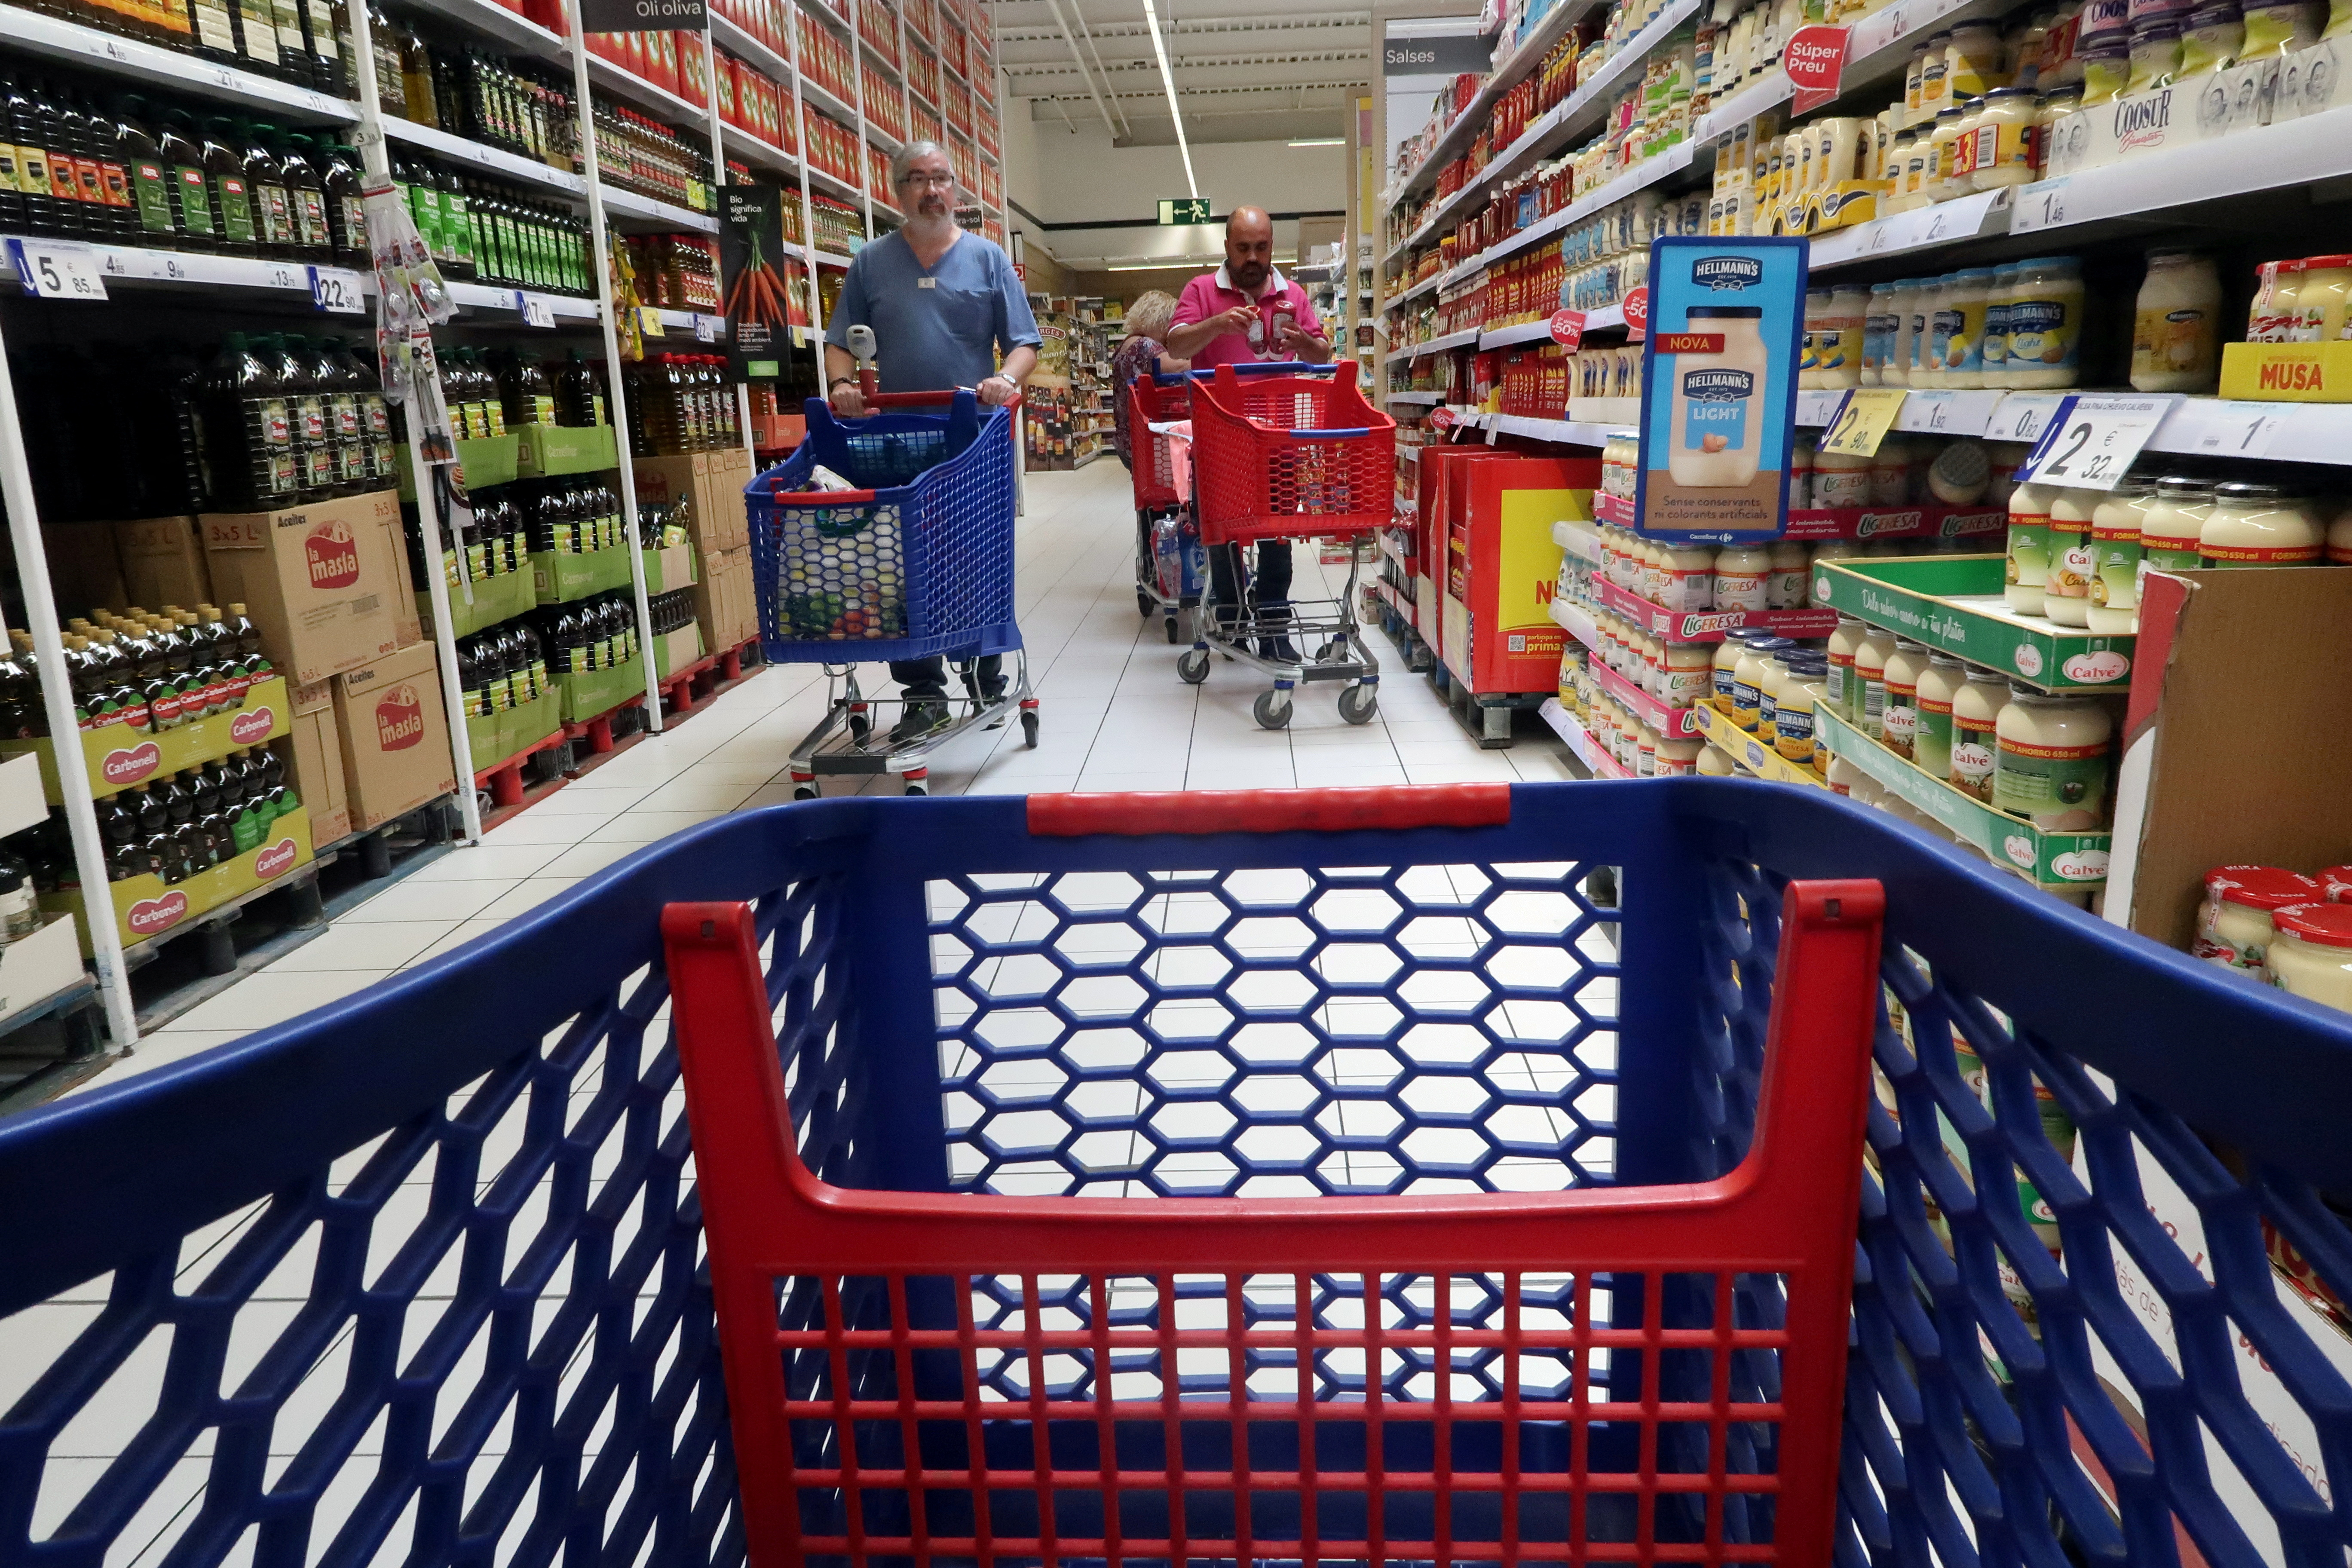 FILE PHOTO: People push shopping cart in a Carrefour supermarket in Cabrera de Mar, near Barcelona, Spain May 19, 2017. REUTERS/Albert Gea/File Photo